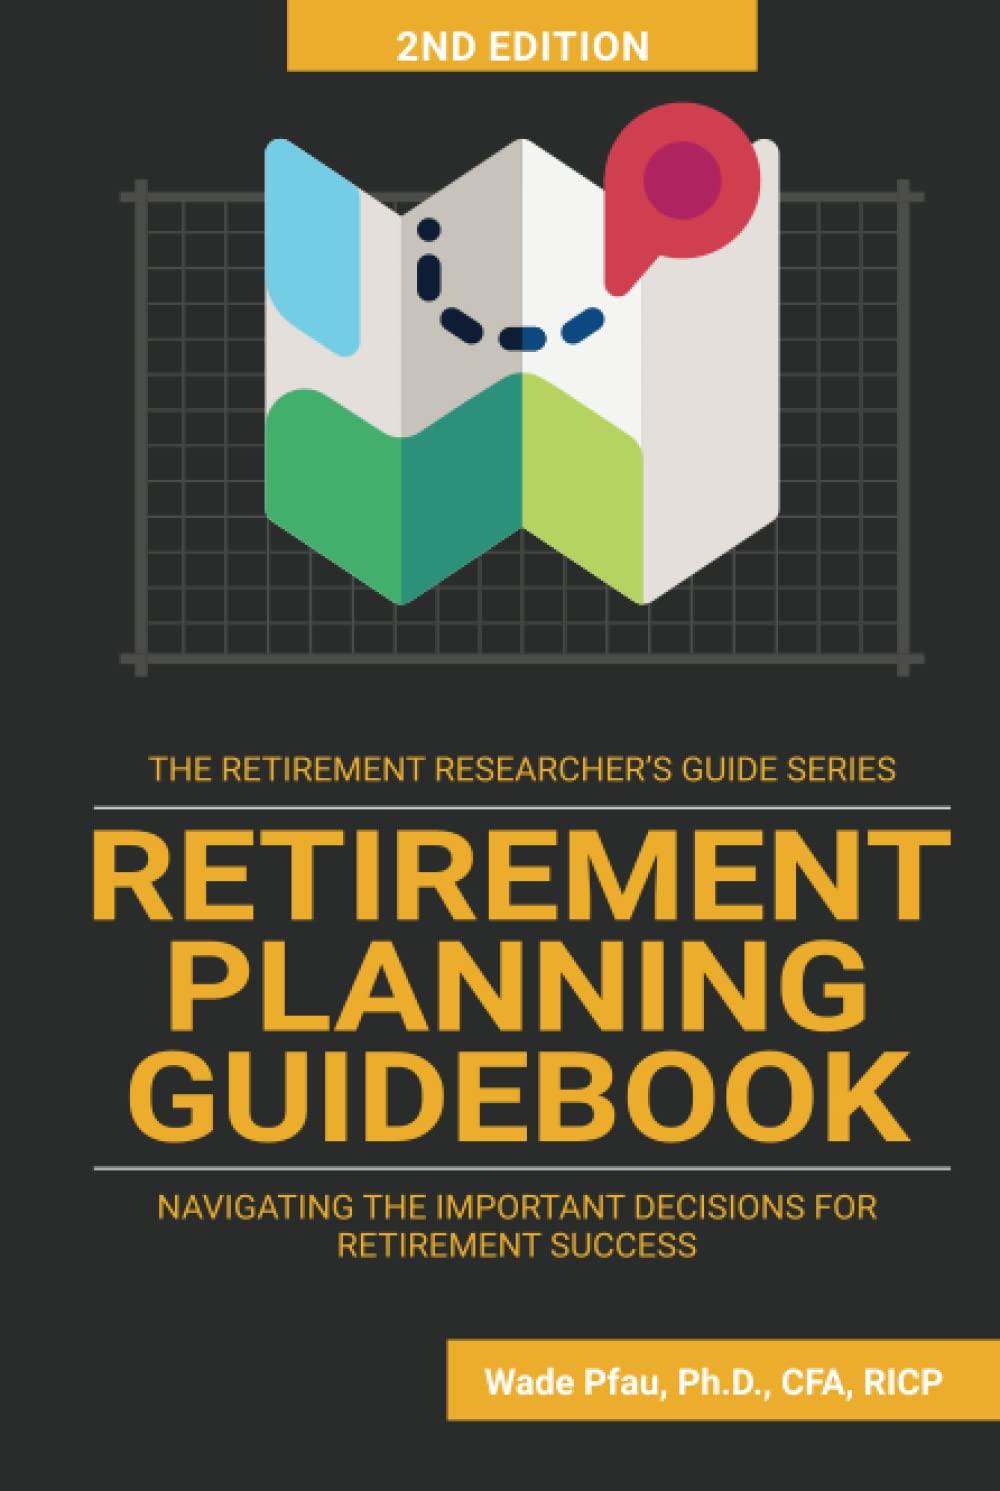 retirement planning guidebook navigating the important decisions for retirement success 2nd edition wade pfau